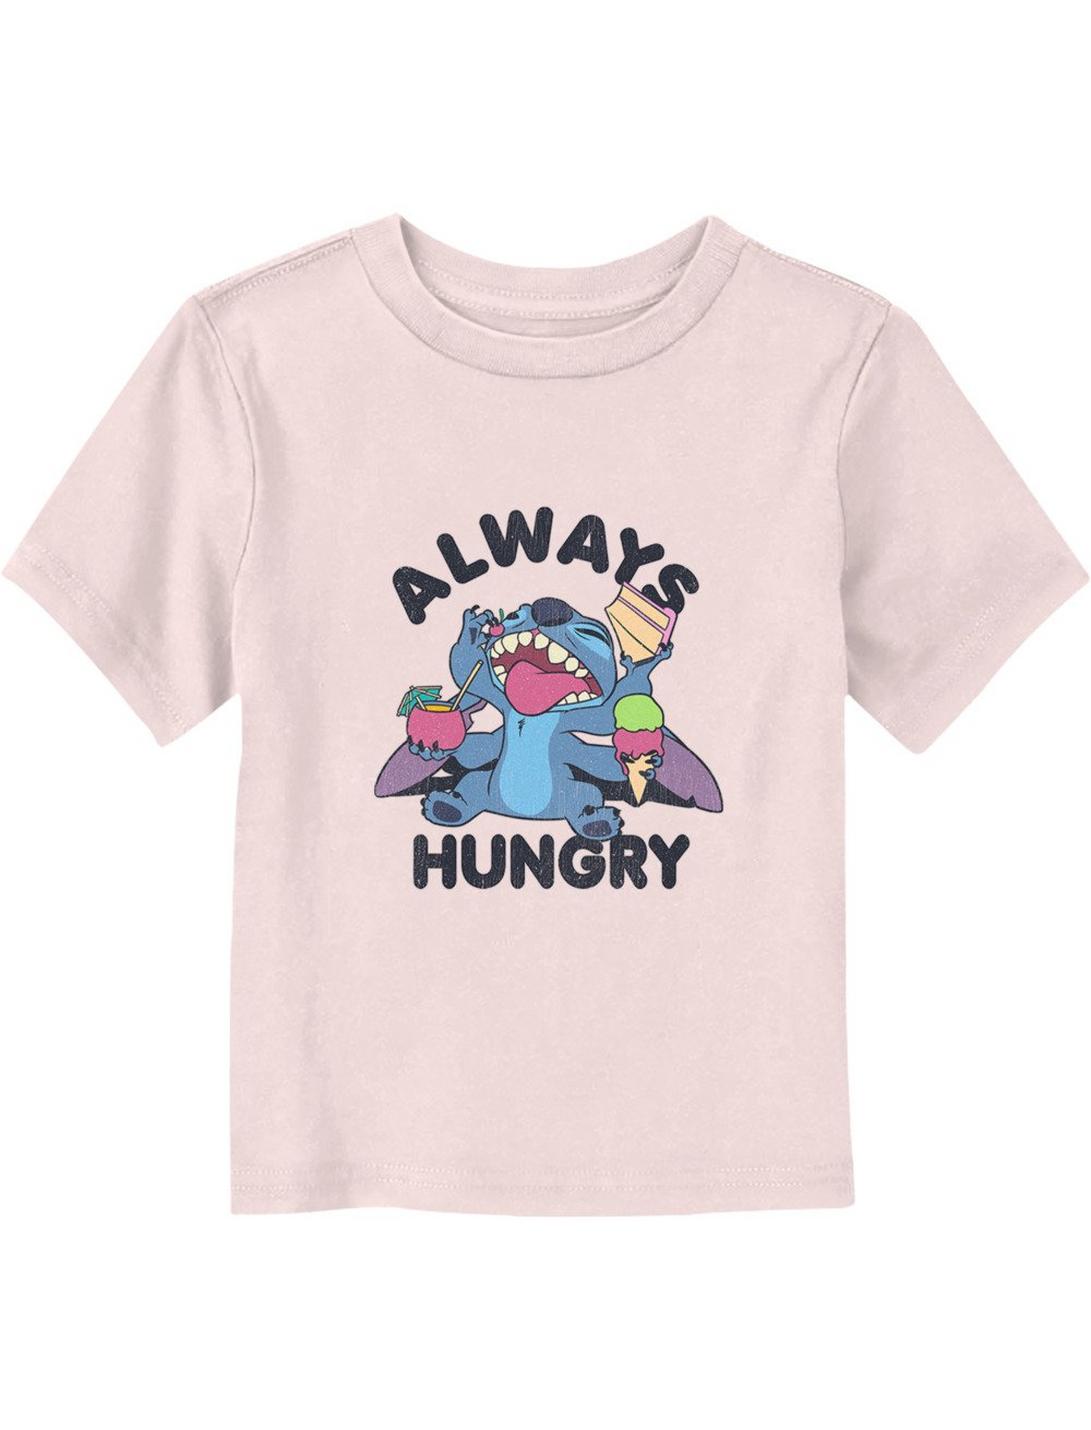 Disney Lilo & Stitch Always Hungry Toddler T-Shirt, LIGHT PINK, hi-res